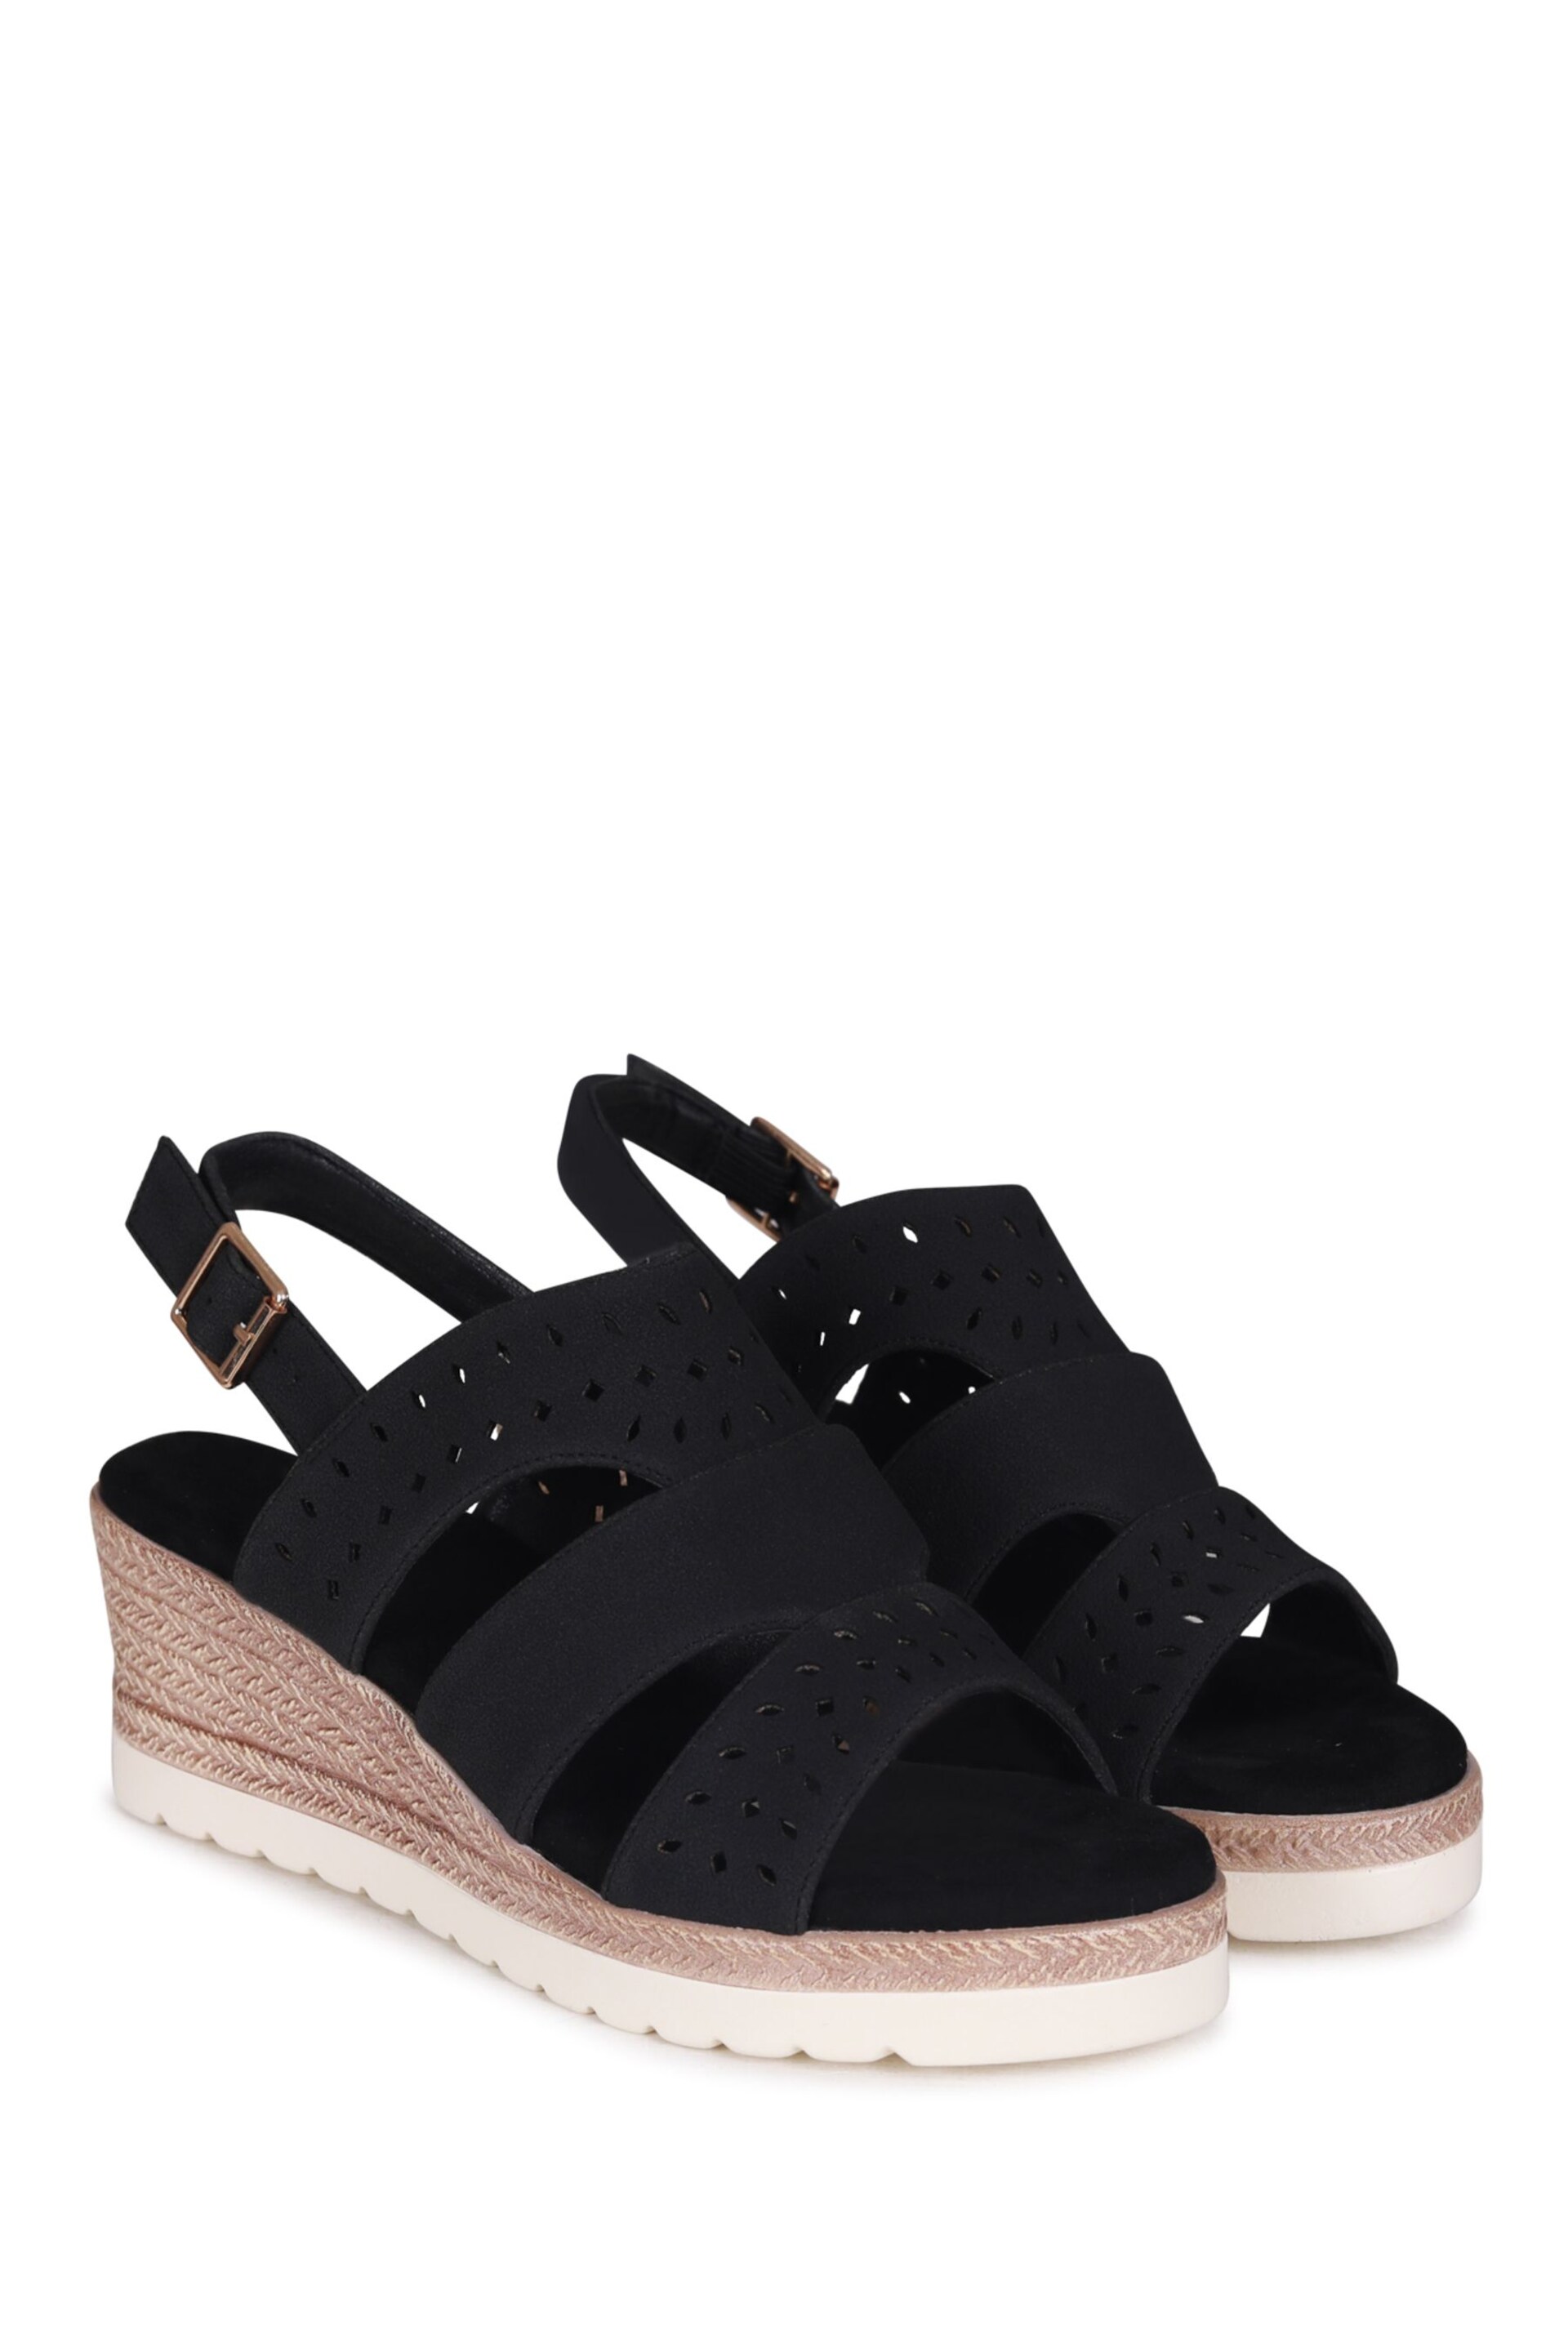 Linzi Black Caryn Wedge Sandals With Cut Out Front Straps - Image 3 of 4